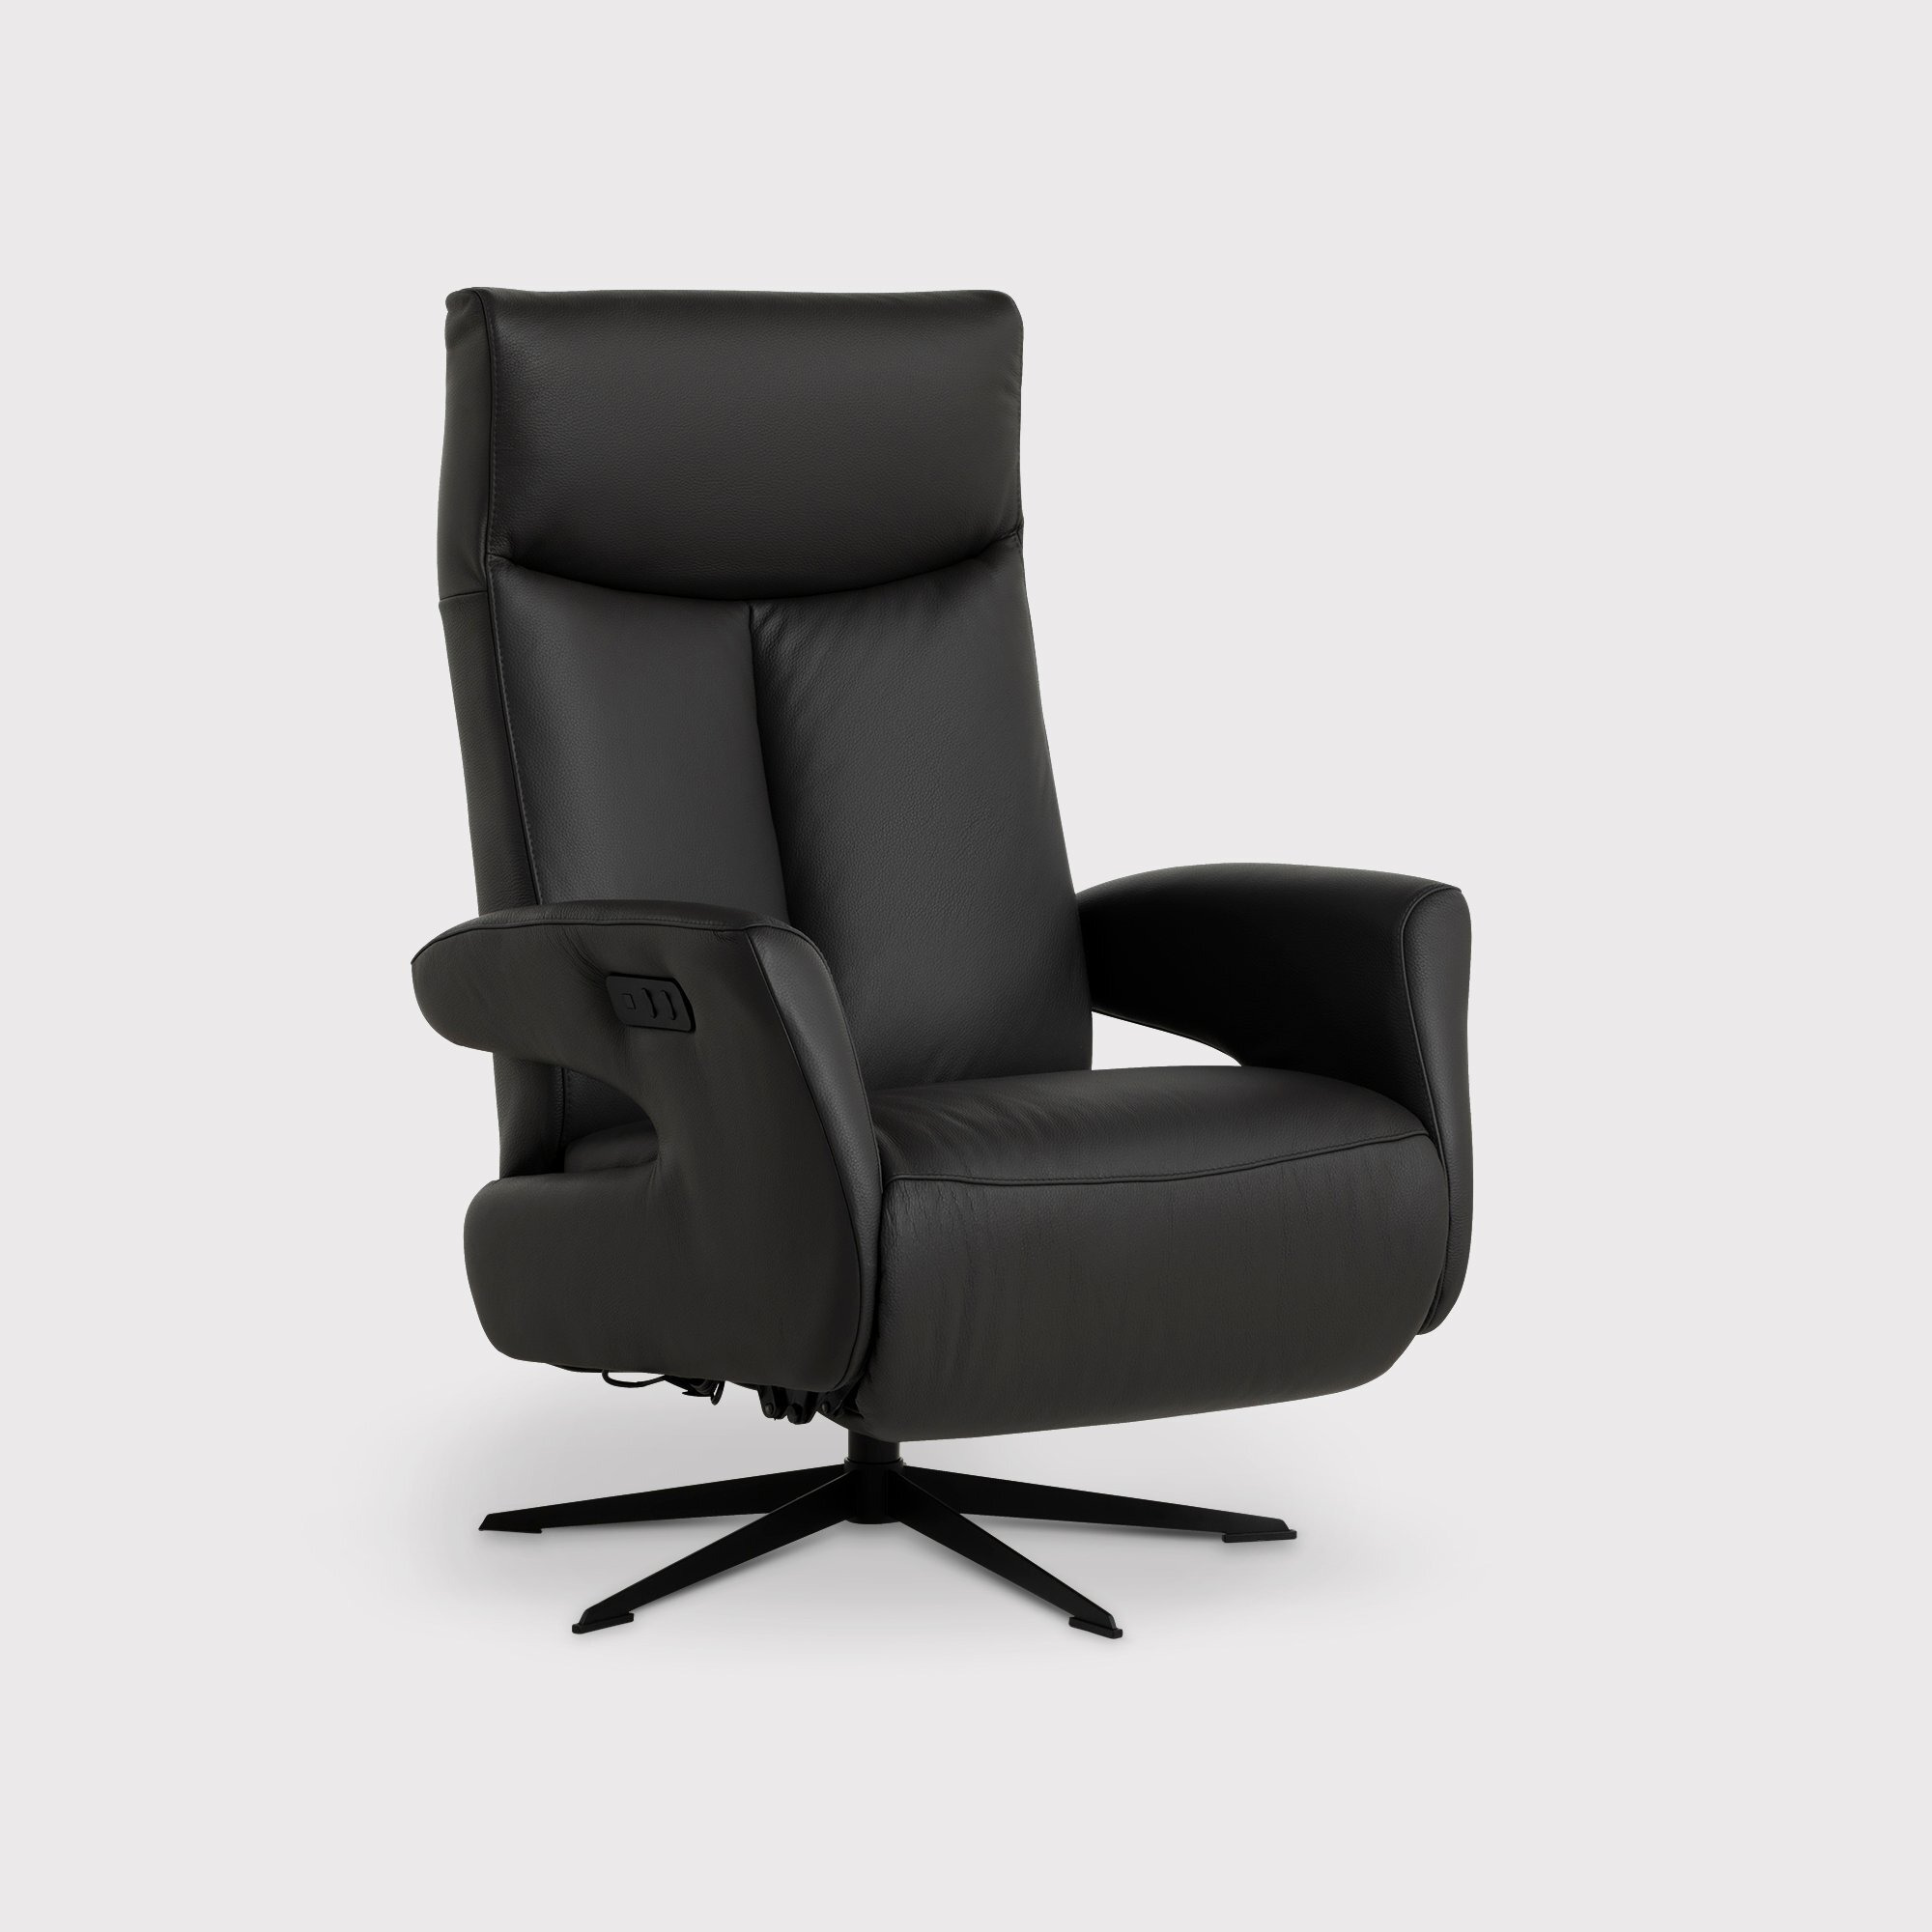 Sander Dual Motor Electric Reclining Recliner Chair, Black Leather - Barker & Stonehouse - image 1